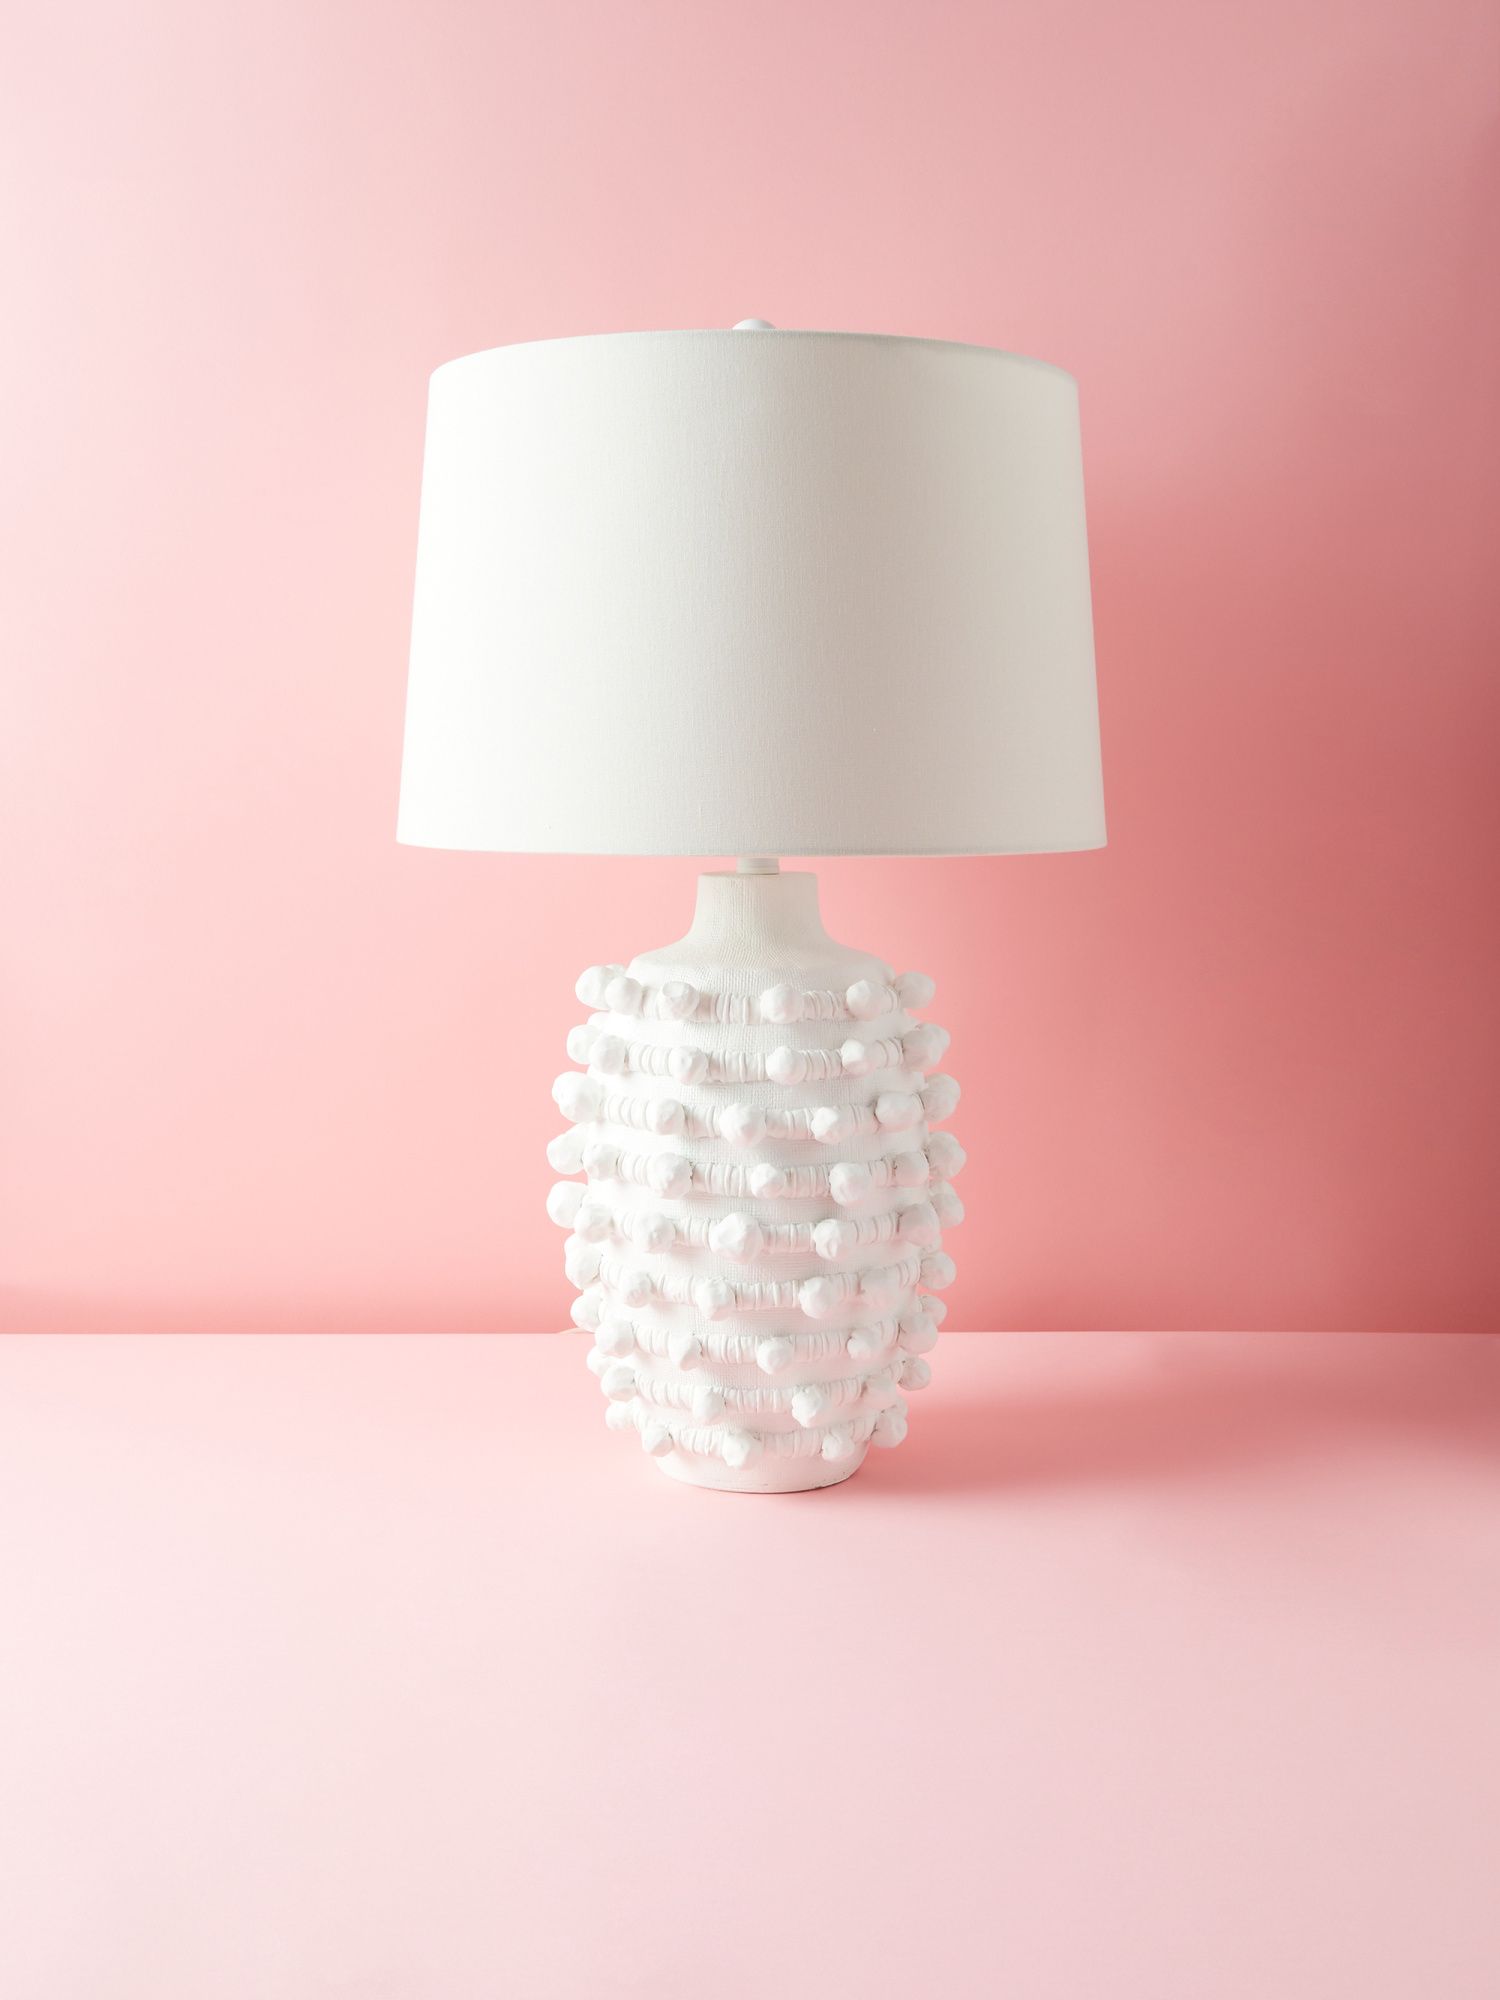 JAMIE YOUNG COMPANY
							
							28in Ceramic Bubble Textured Ball Lamp
						
						
							

... | HomeGoods